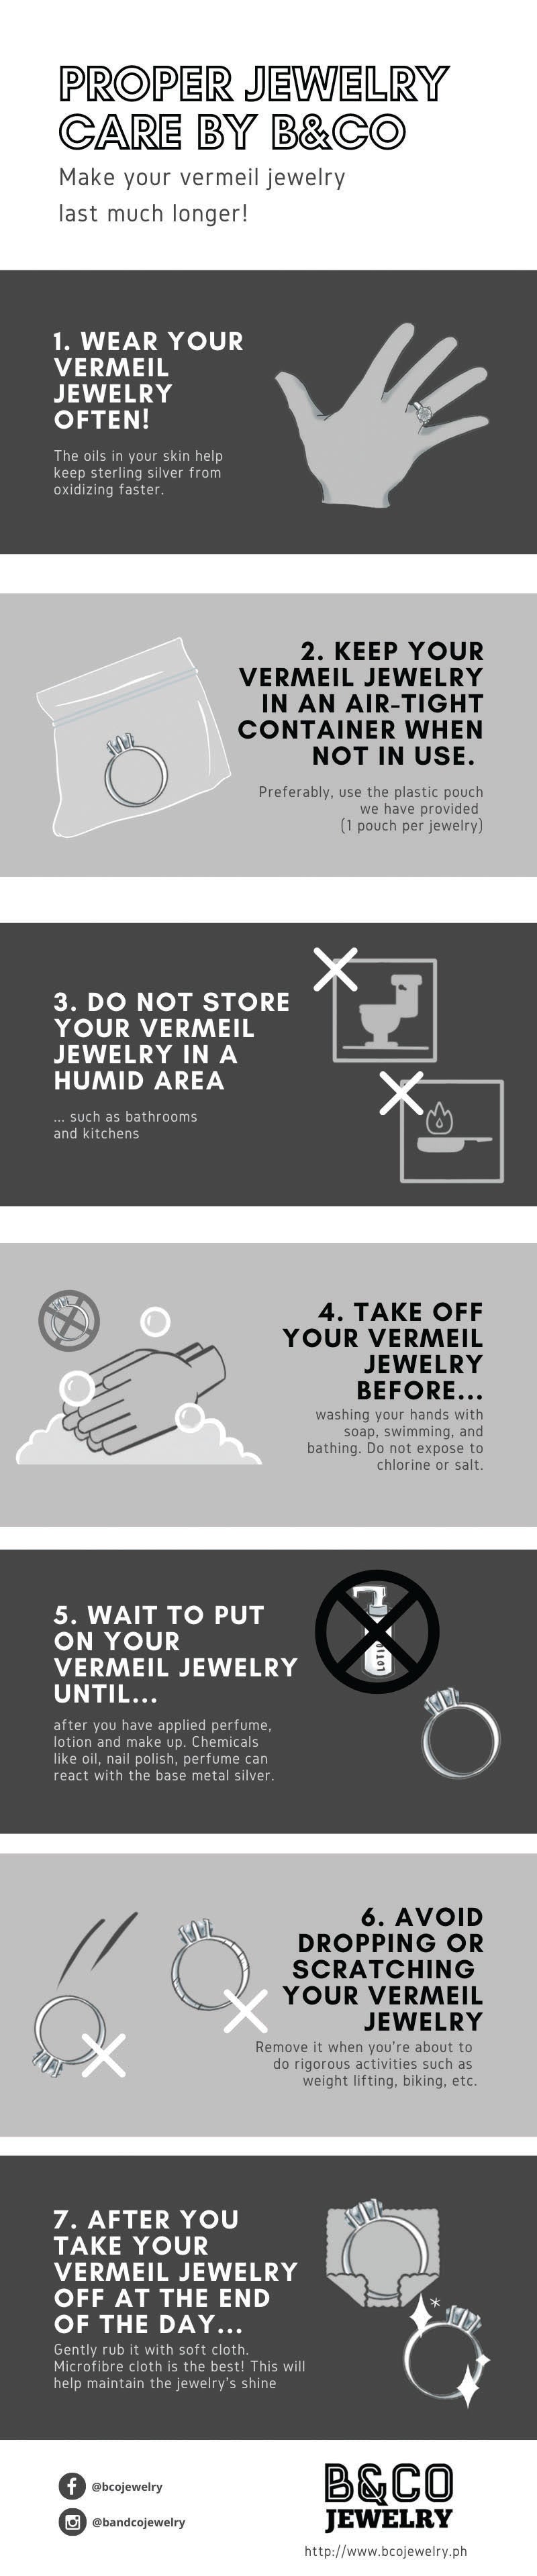 Our 5 Favourite Jewellery Care Tips & Tricks